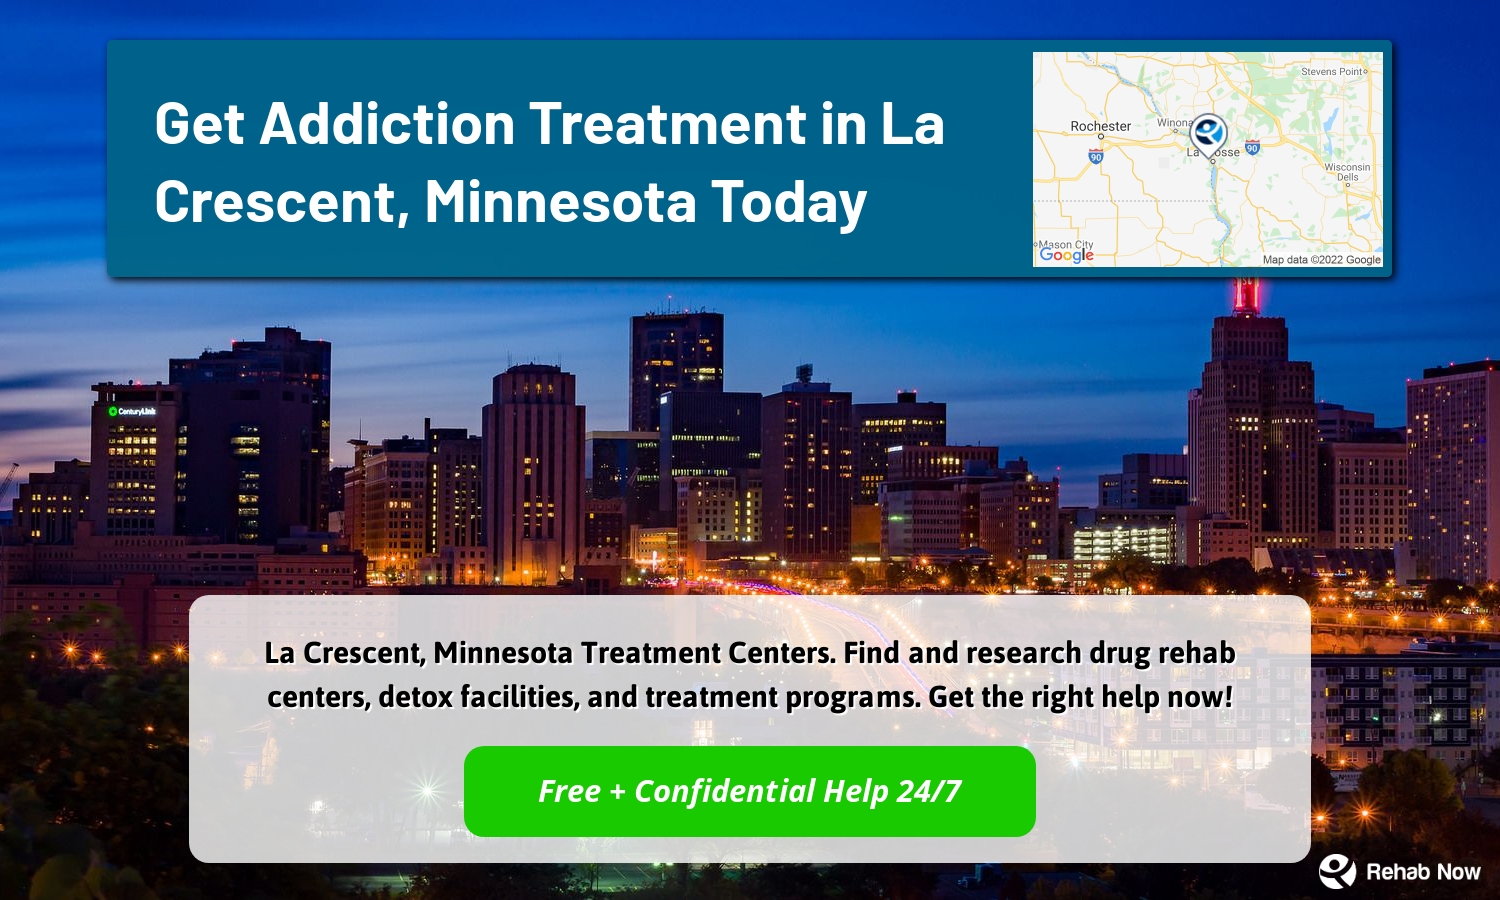 La Crescent, Minnesota Treatment Centers. Find and research drug rehab centers, detox facilities, and treatment programs. Get the right help now!